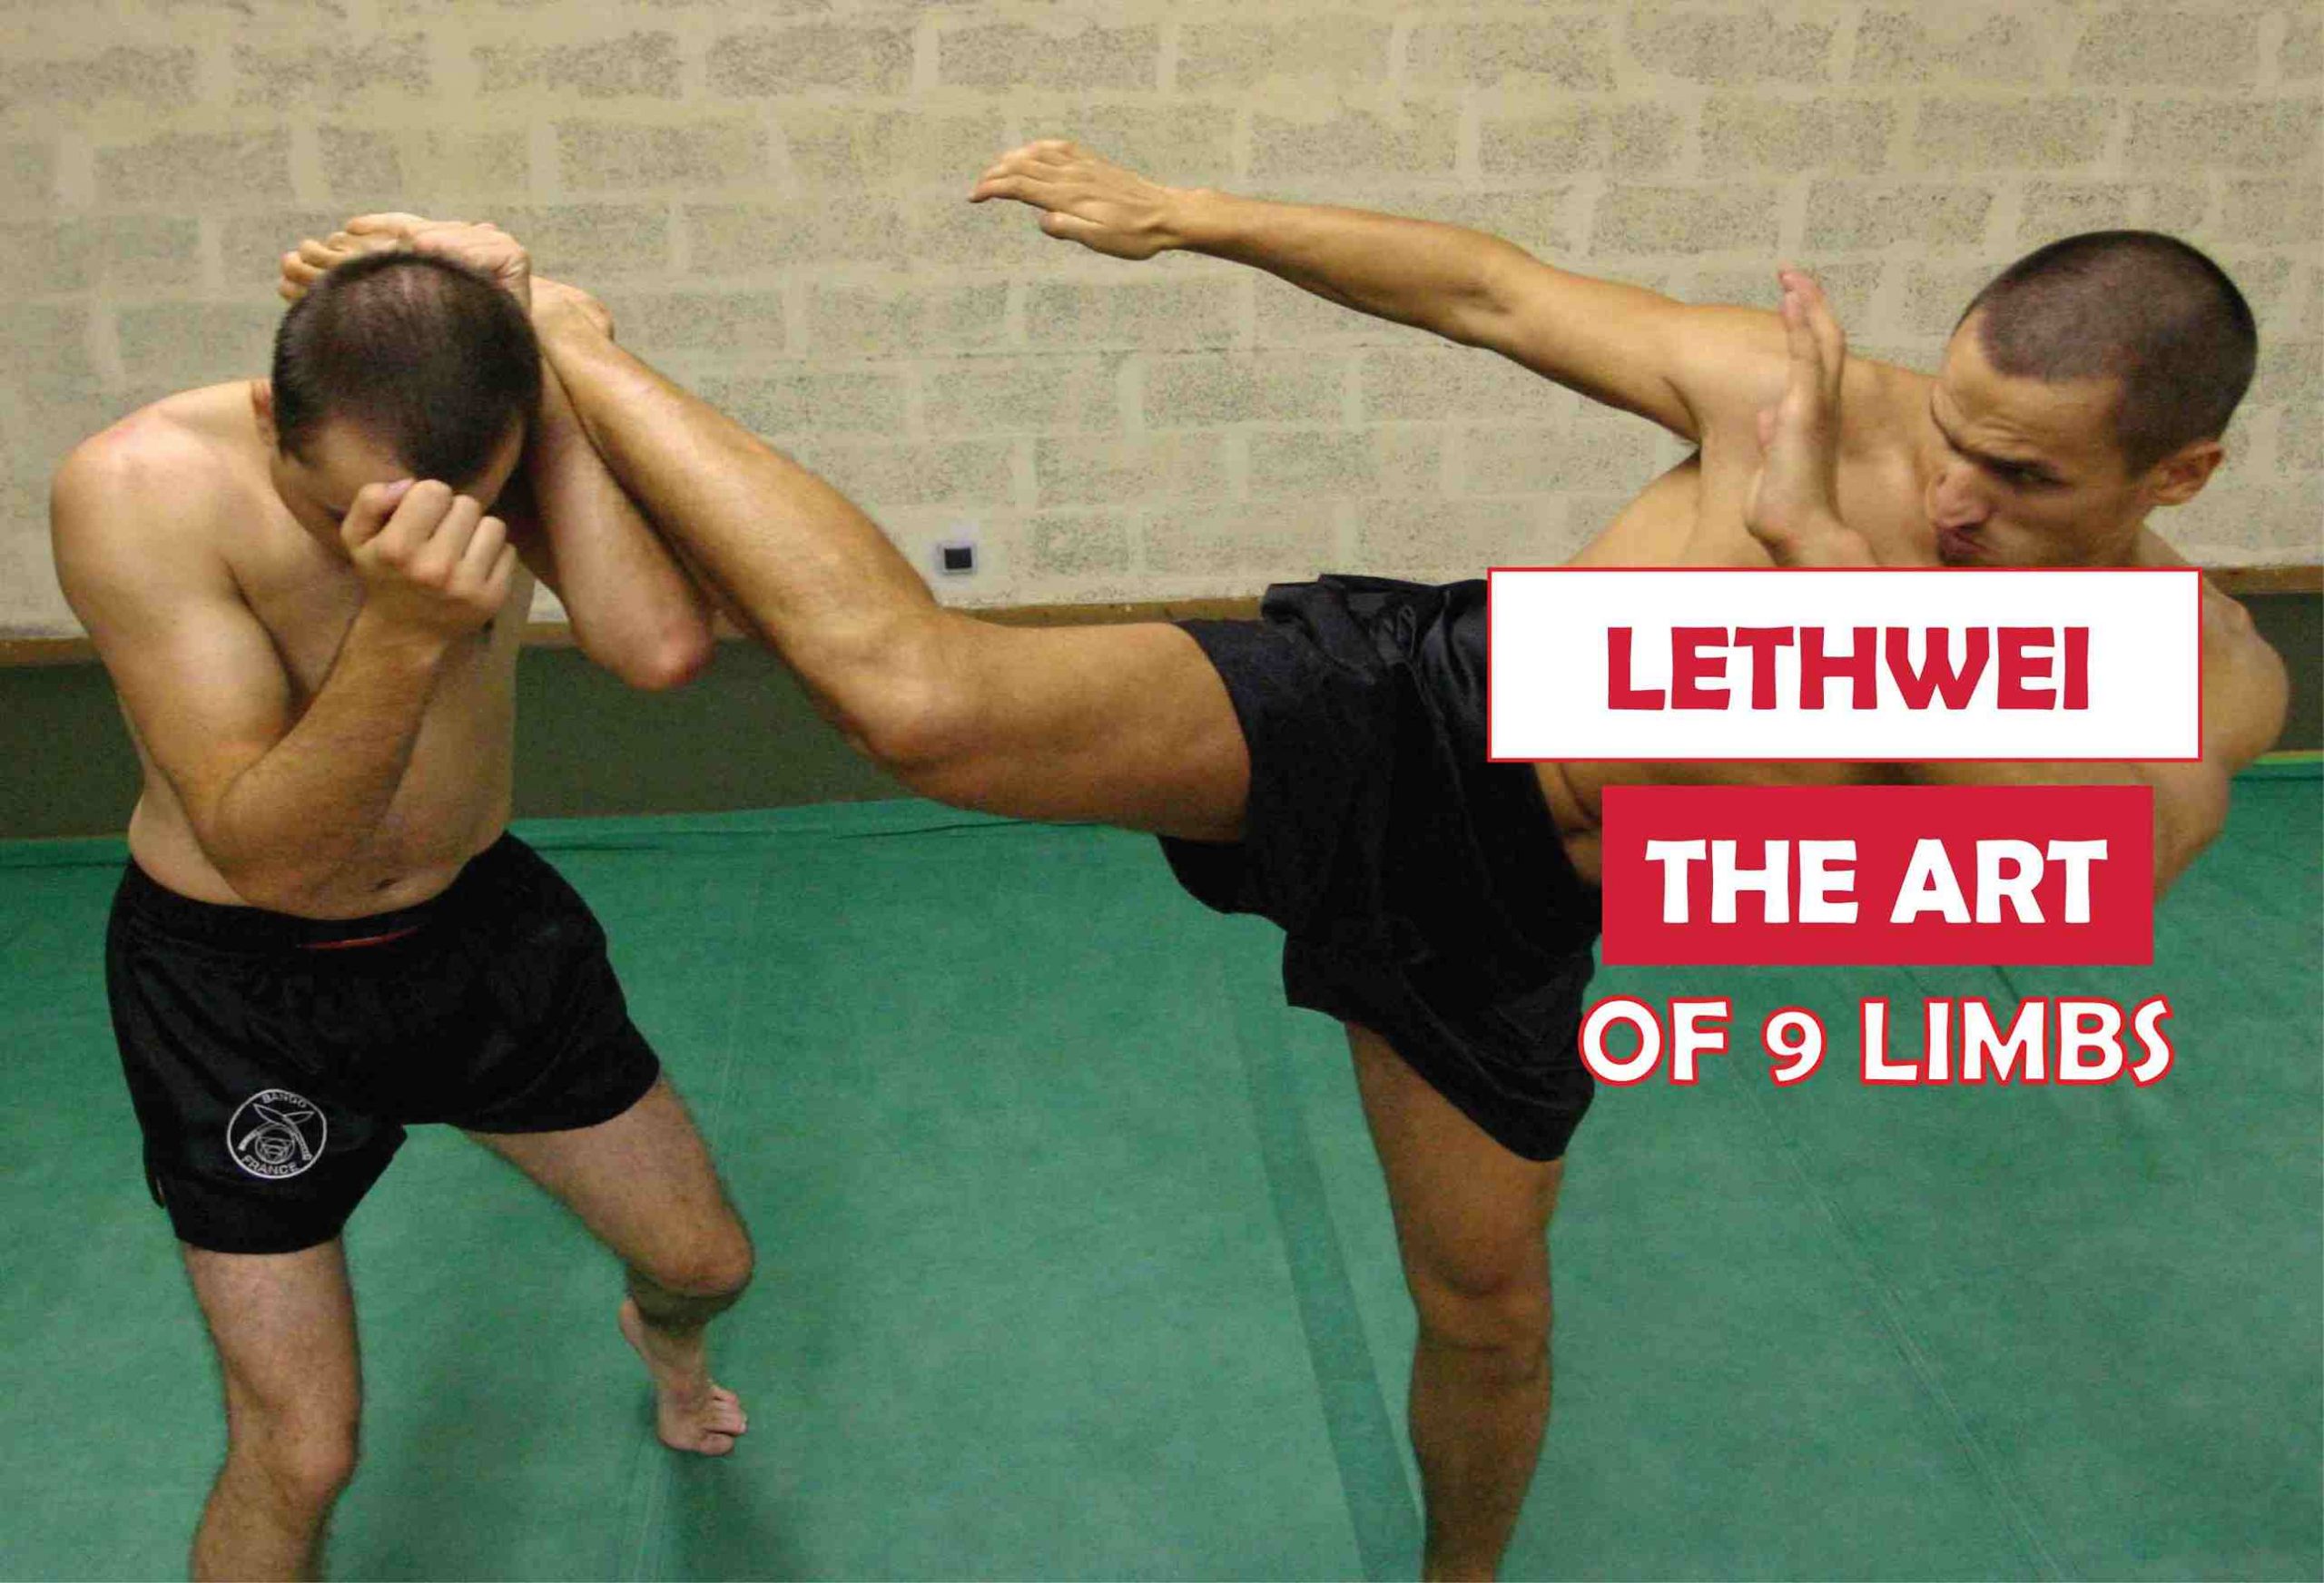 What is the Lethwei - The Art of 9 limbs